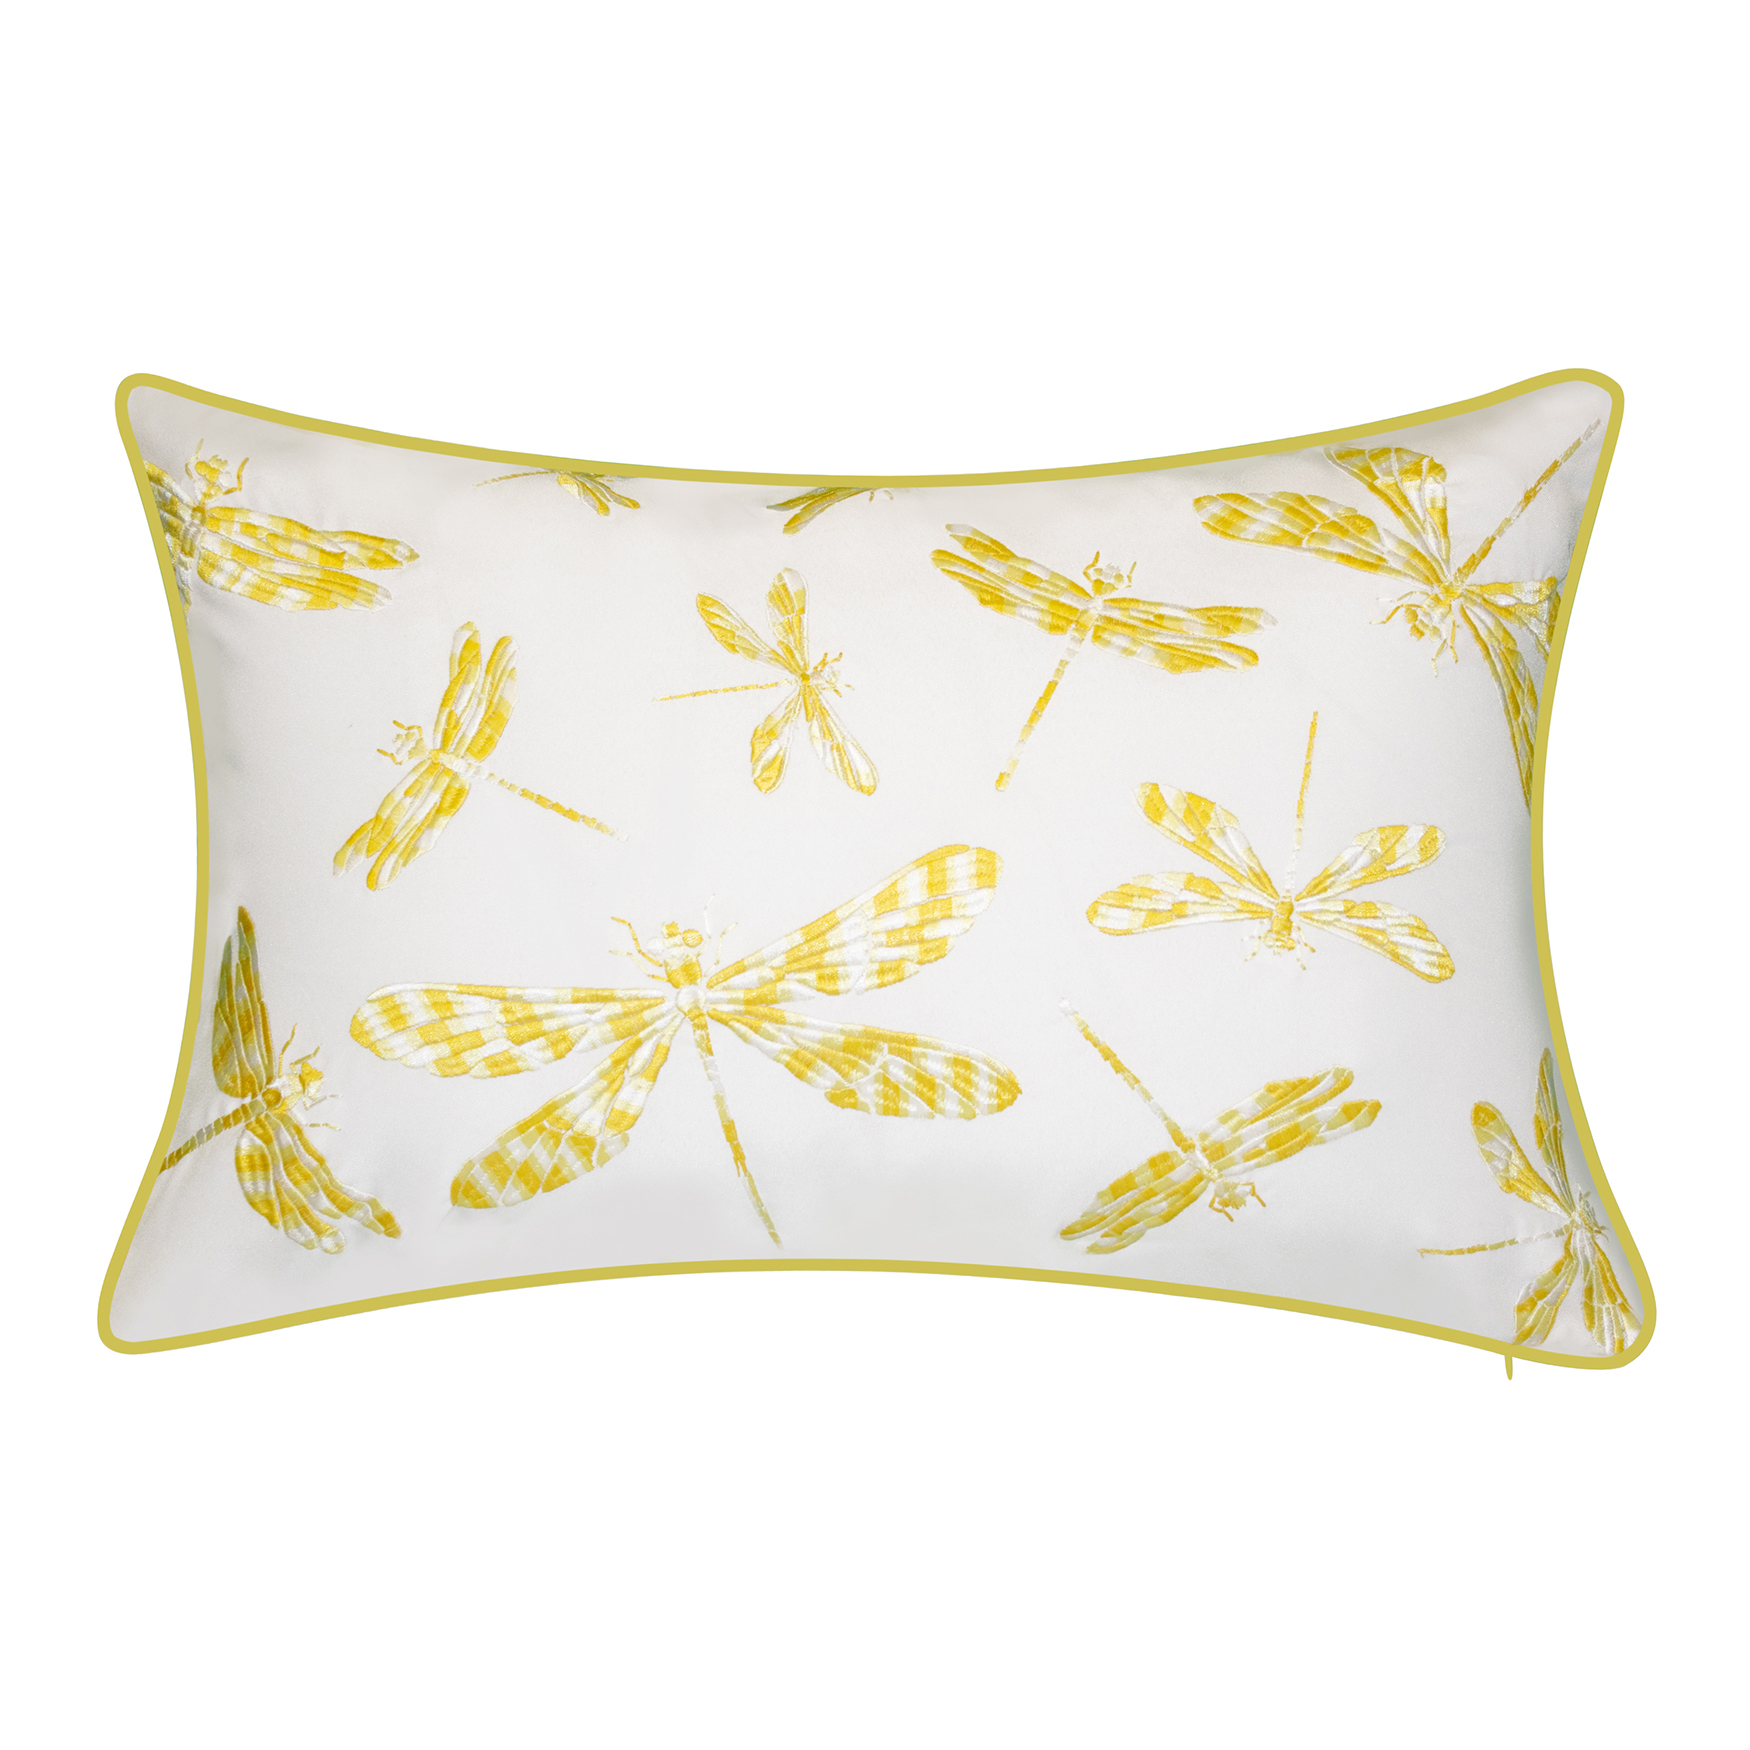 Indoor & Outdoor Embroidered Dragonflies Decorative Pillow, CITRON WHITE